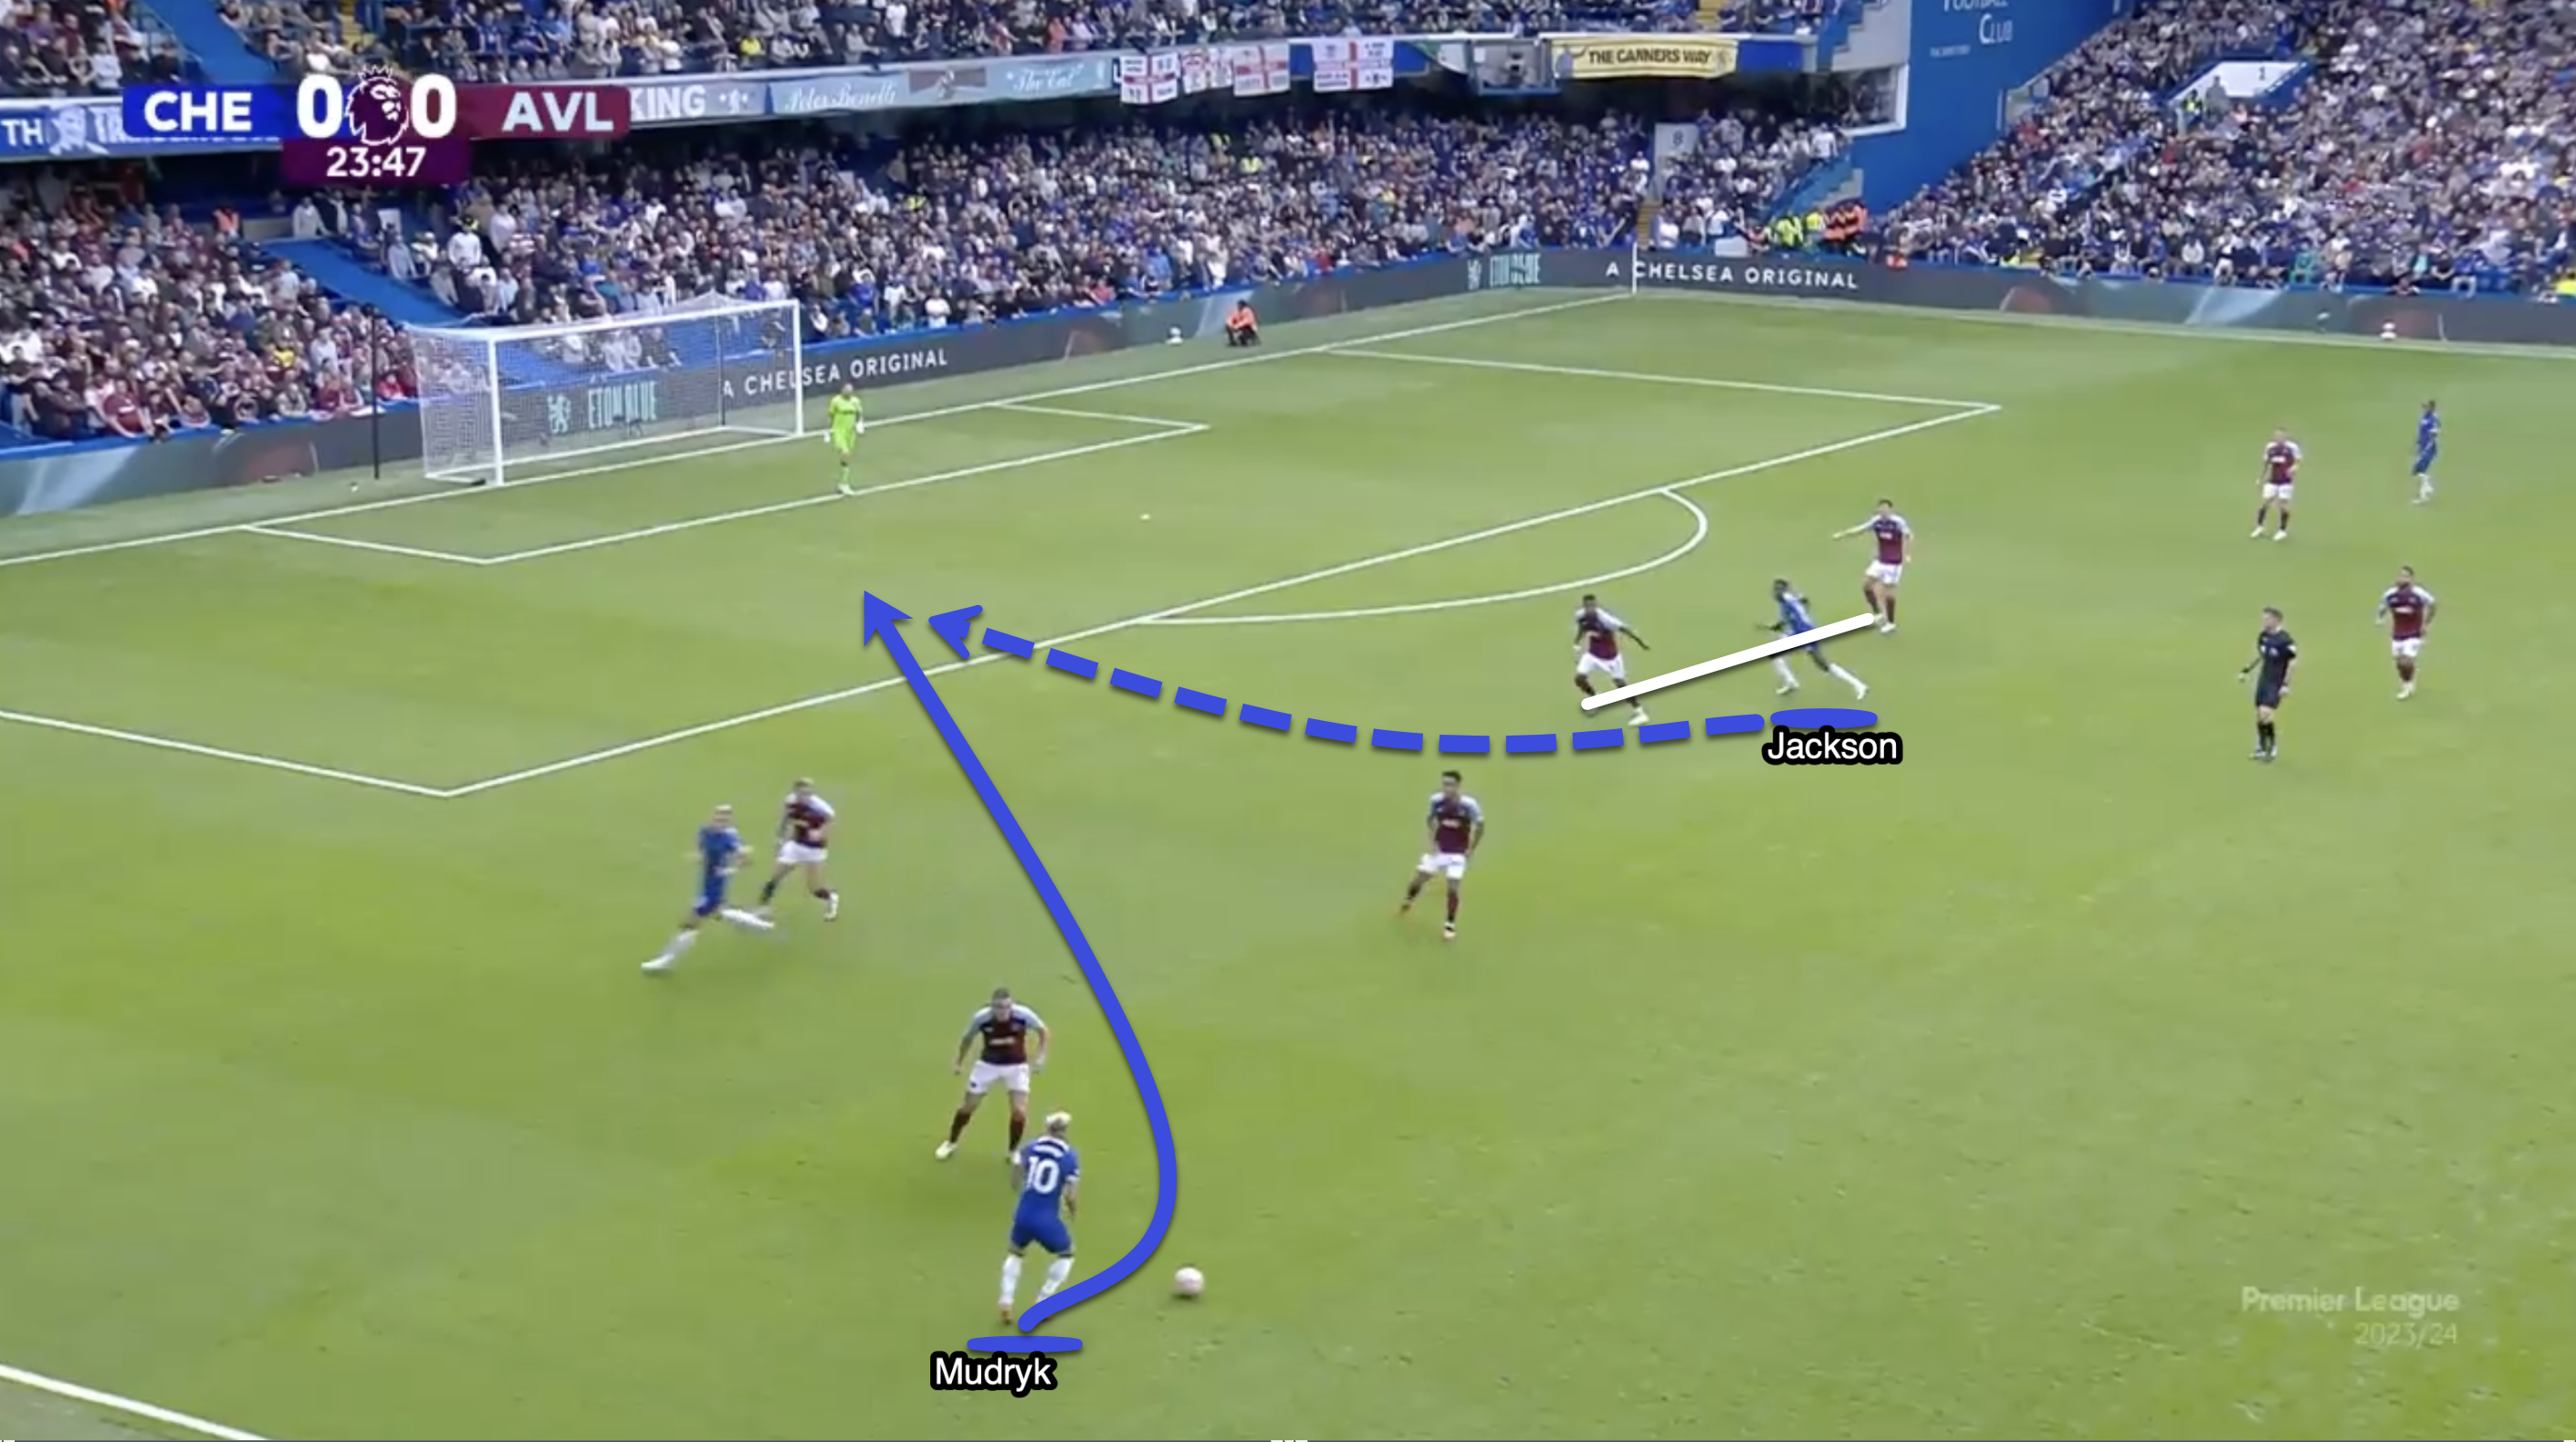 Chelsea are creating chances but are not taking them. Jackson takes up a good initial position though, central and between the centrebacks, this is exactly the kind of positioning that we would expect to see from Osimhen. However Jackson missed the chance.